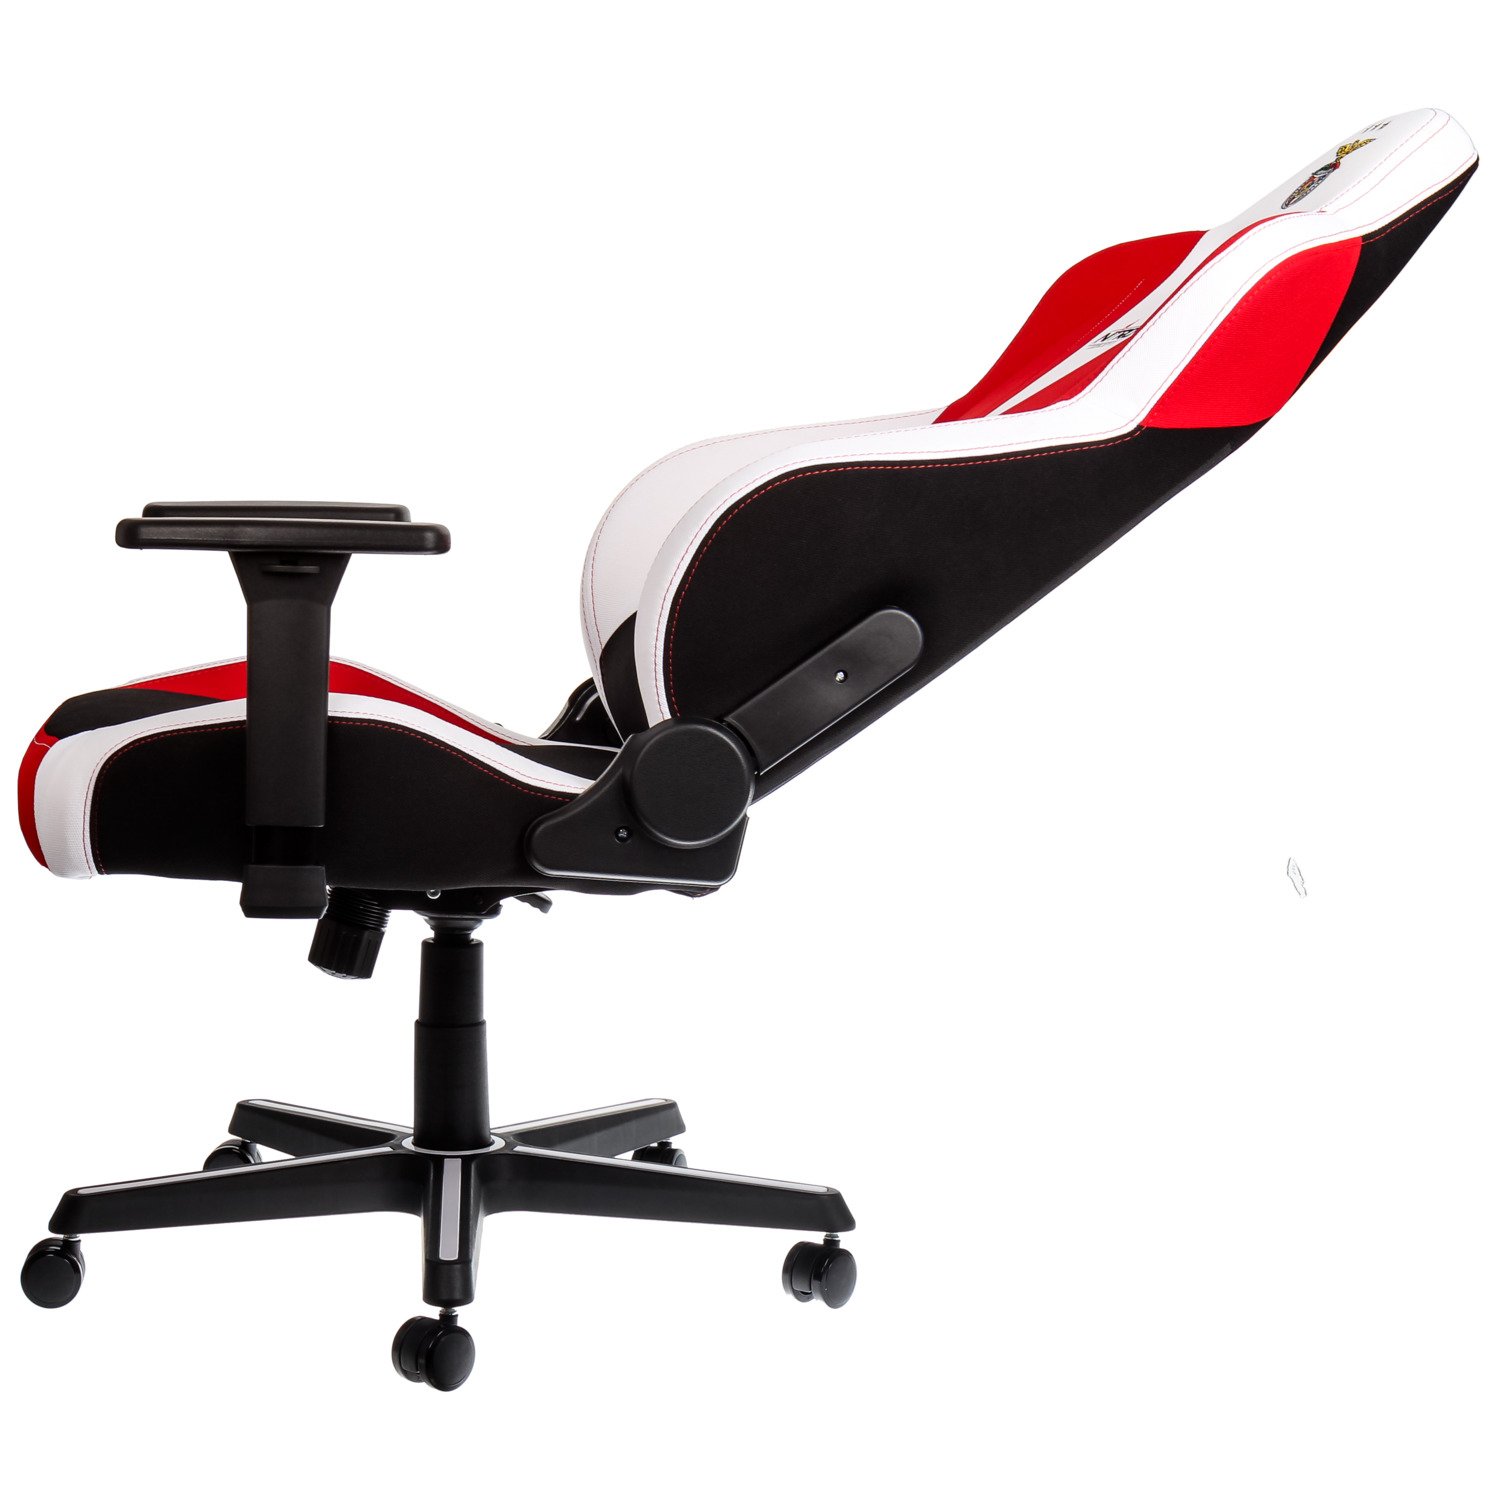 nitro-concepts - S300 Gaming Chair SL Benfica Edition